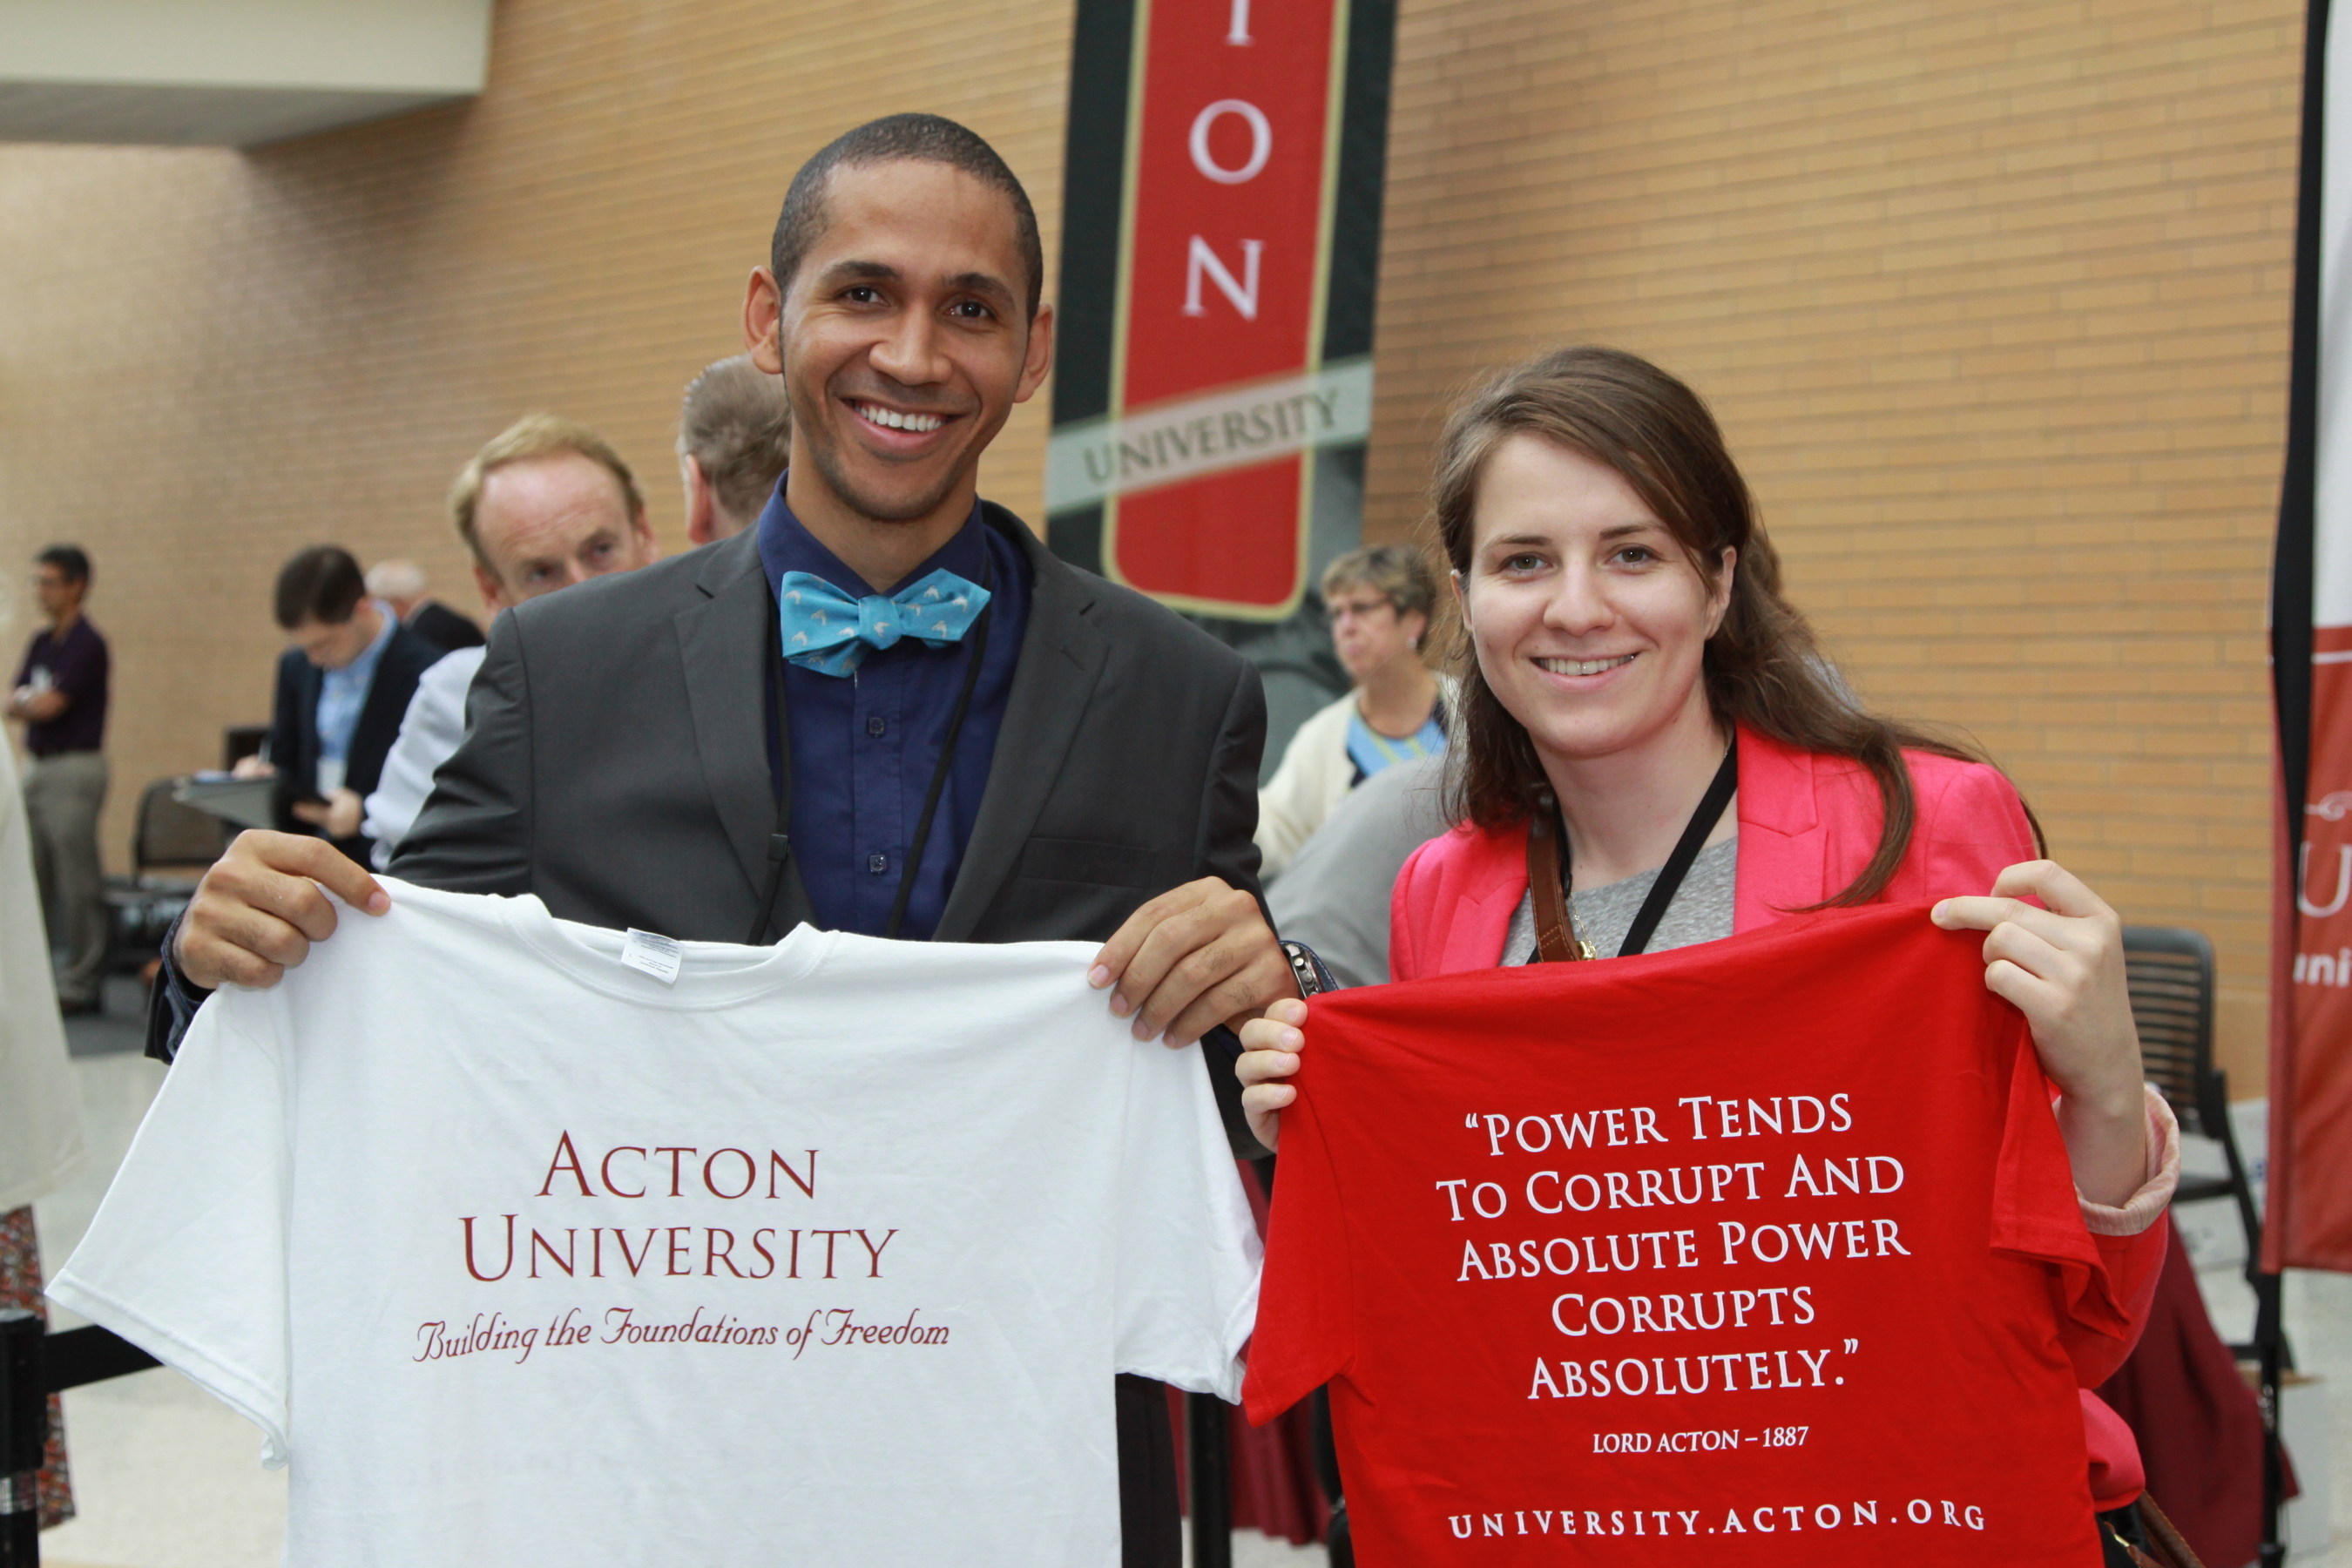 Acton University impacts minds and hearts from around the world, and awards a 'graduation' shirt to each participant. A reminder to 'build the foundations of freedom' wherever we may be. (PRNewsFoto/Atlas Network)